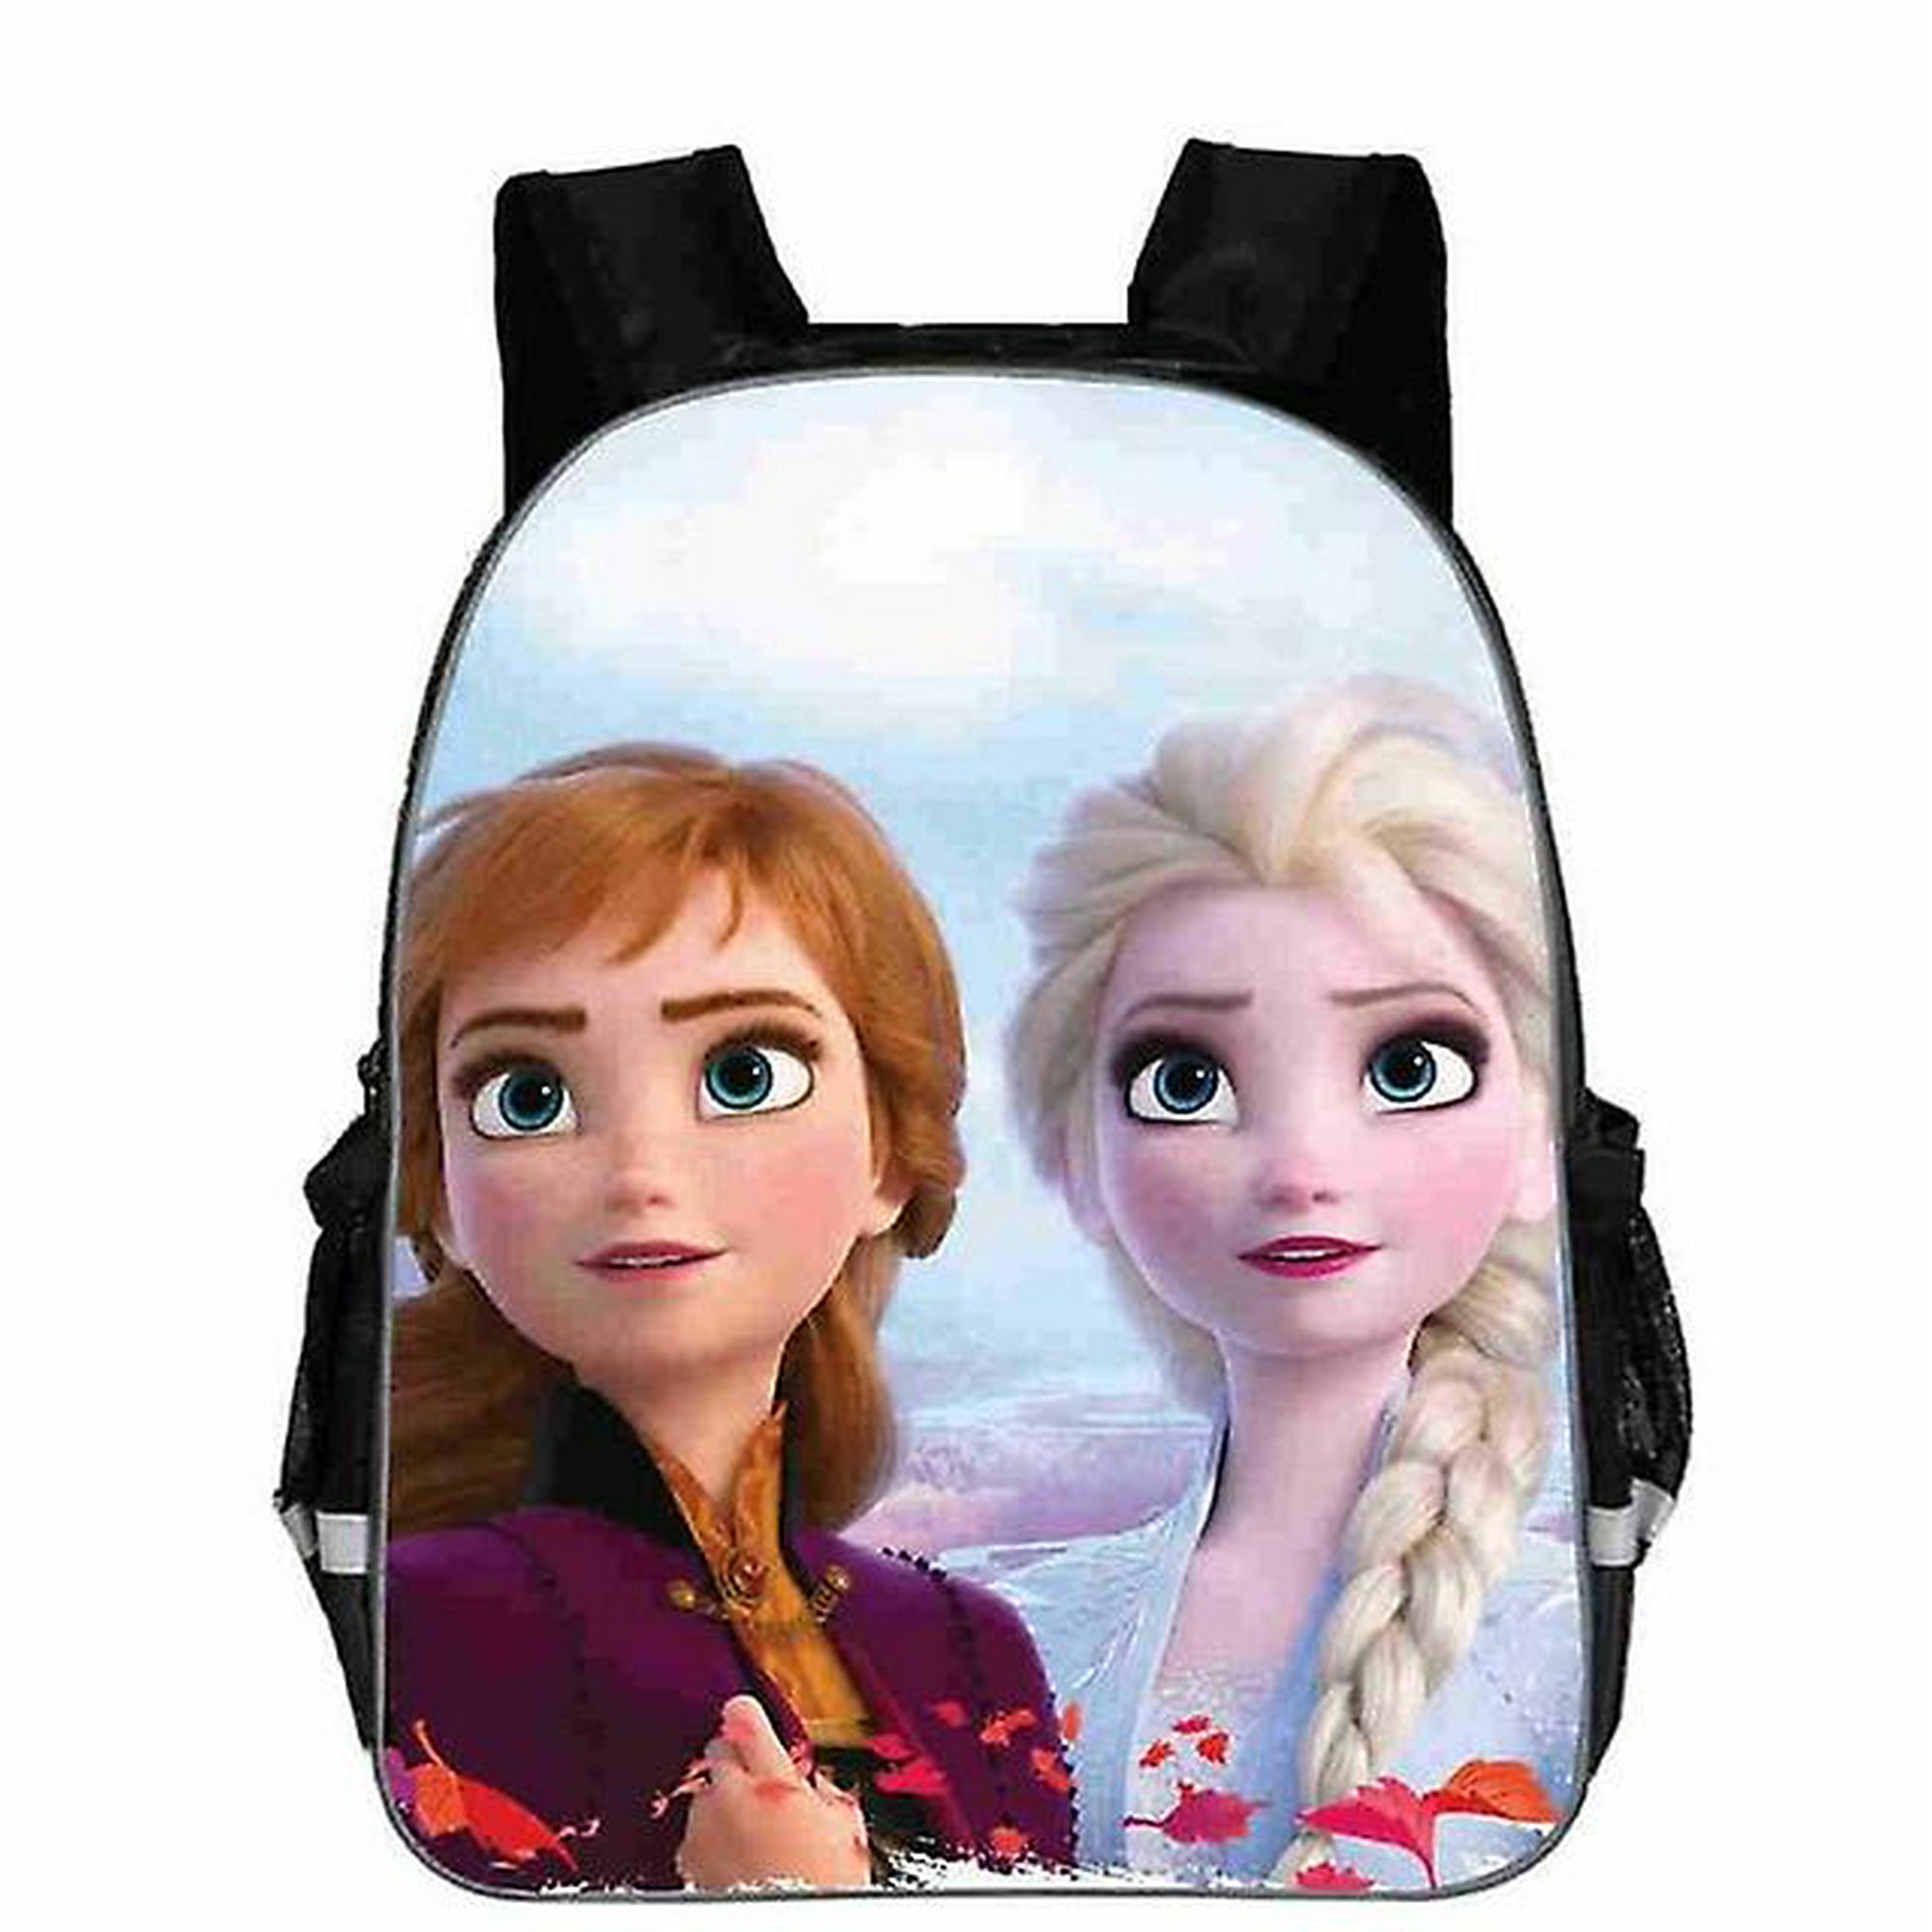 Frozen Princess Elsa Backpack Girls Cartoon School Bag Baby Children  Schoolbags Lovely Knapsack Baby Bags Gift For Girl Same As Picture5 11 Inch  30x24 | Walmart Canada